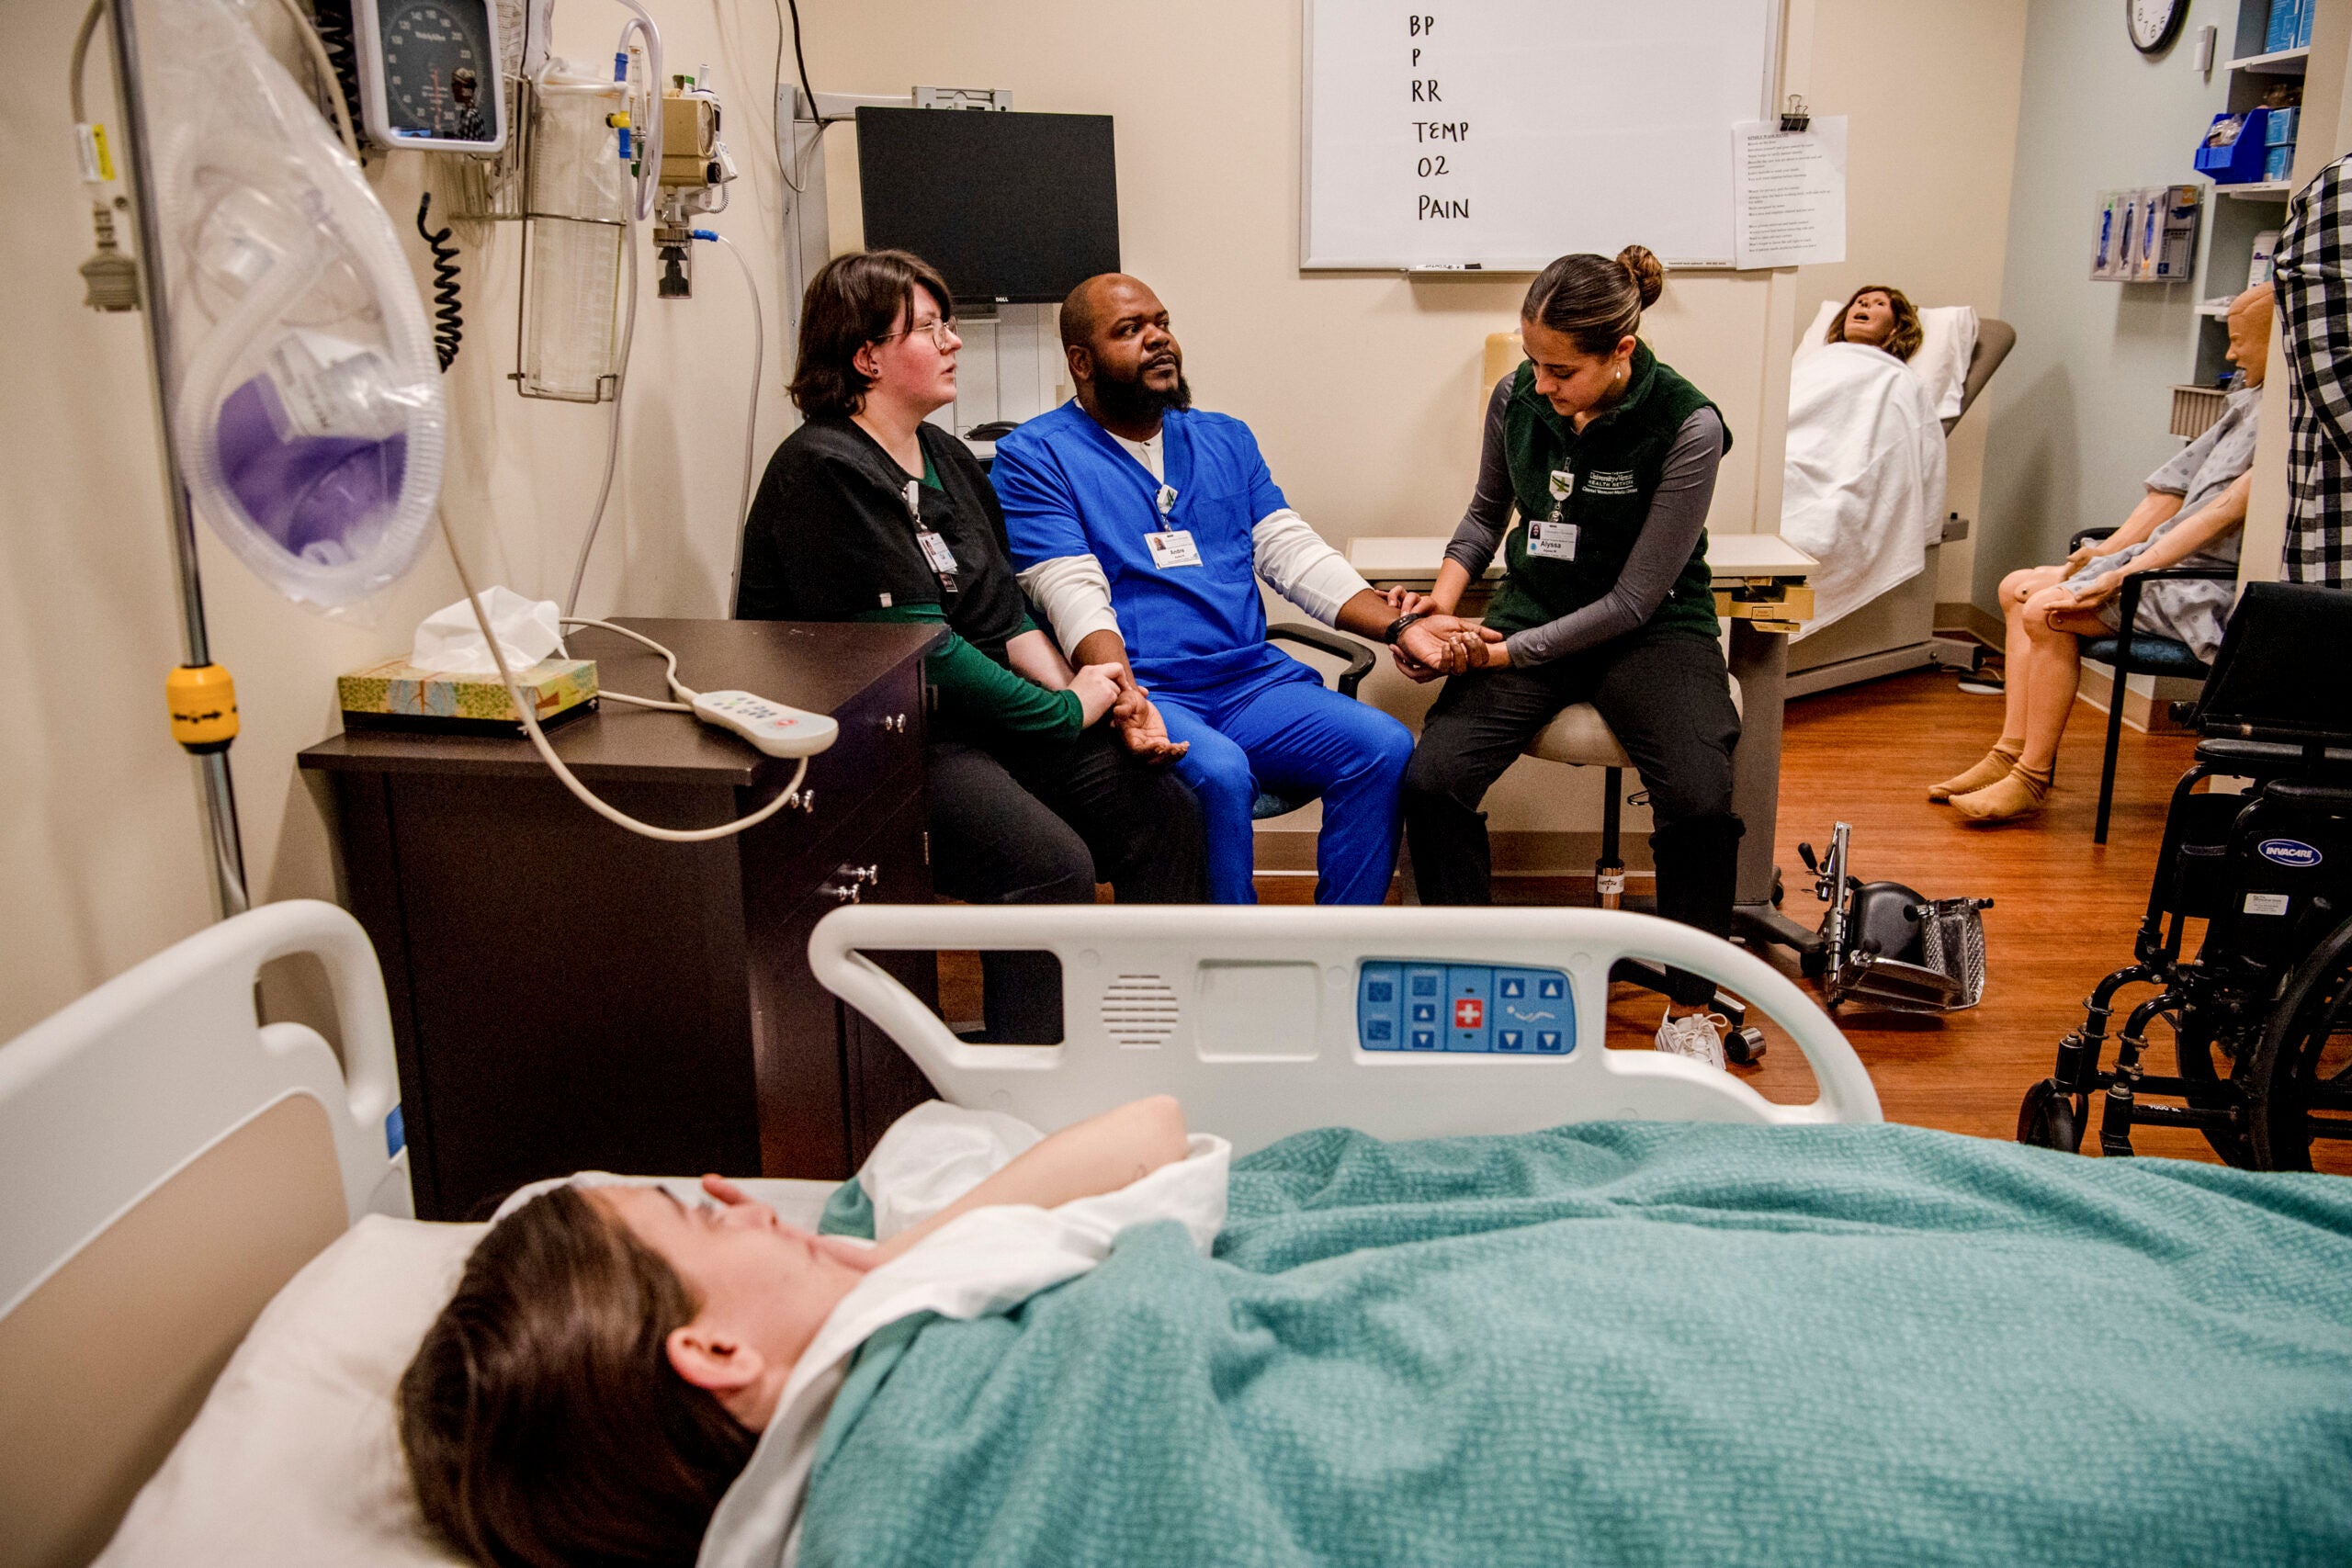 From left, Cal Hobbs, Andre Roberts and Alyssa Winkler practice taking Andre's blood pressure in a simulation lab at the Central Vermont Medical Center in Berlin, Vt.